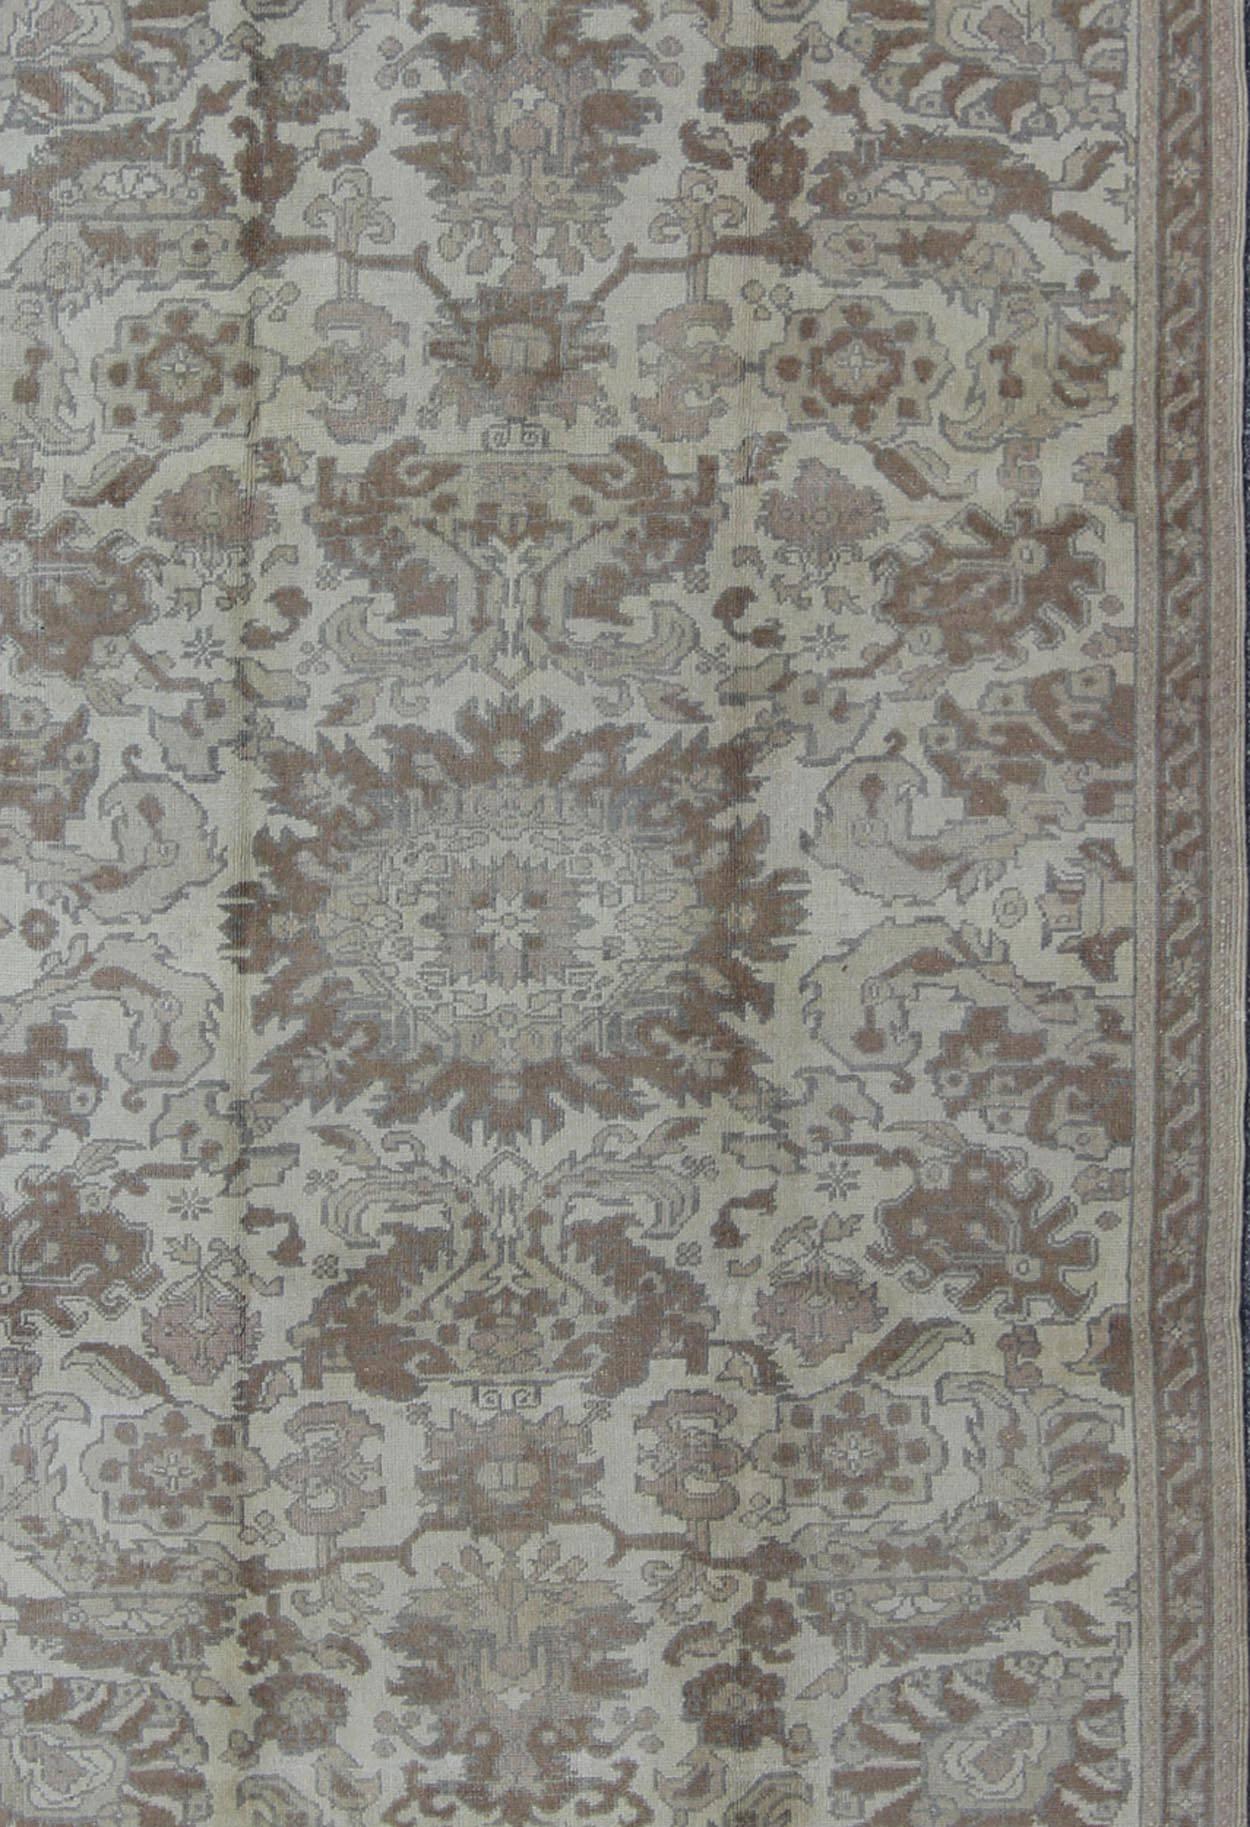 Earth Tone Vintage Turkish Oushak Rug with All-Over Floral Design In Good Condition For Sale In Atlanta, GA